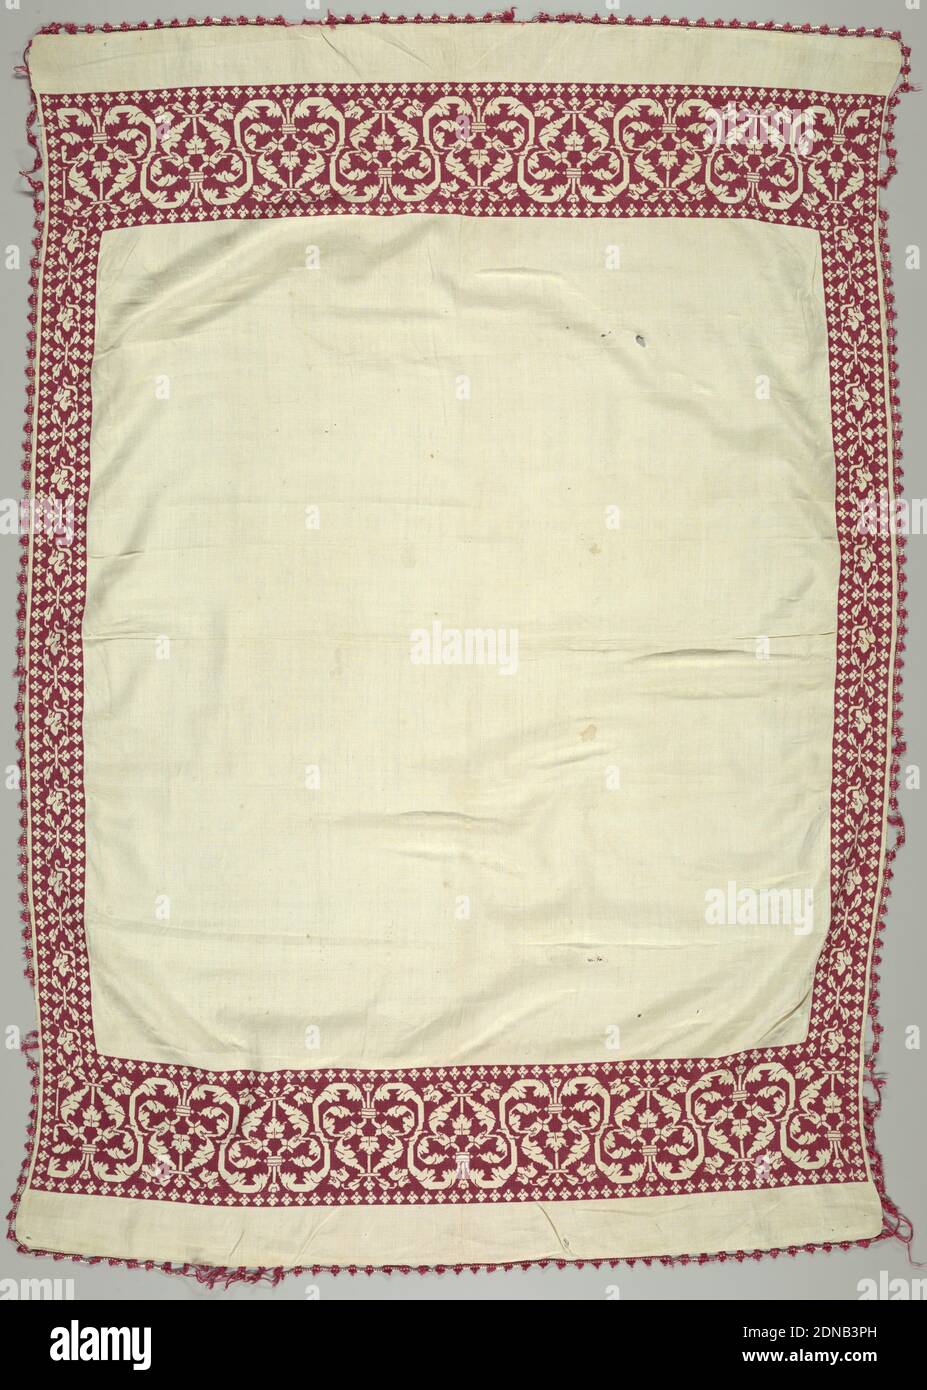 Towel, Medium: linen, silk Technique: embroidered on plain weave using  double running stitches for linear details; background area has horizontal  and vertical wrapping stitches pulled tight to deflect groups of warps and